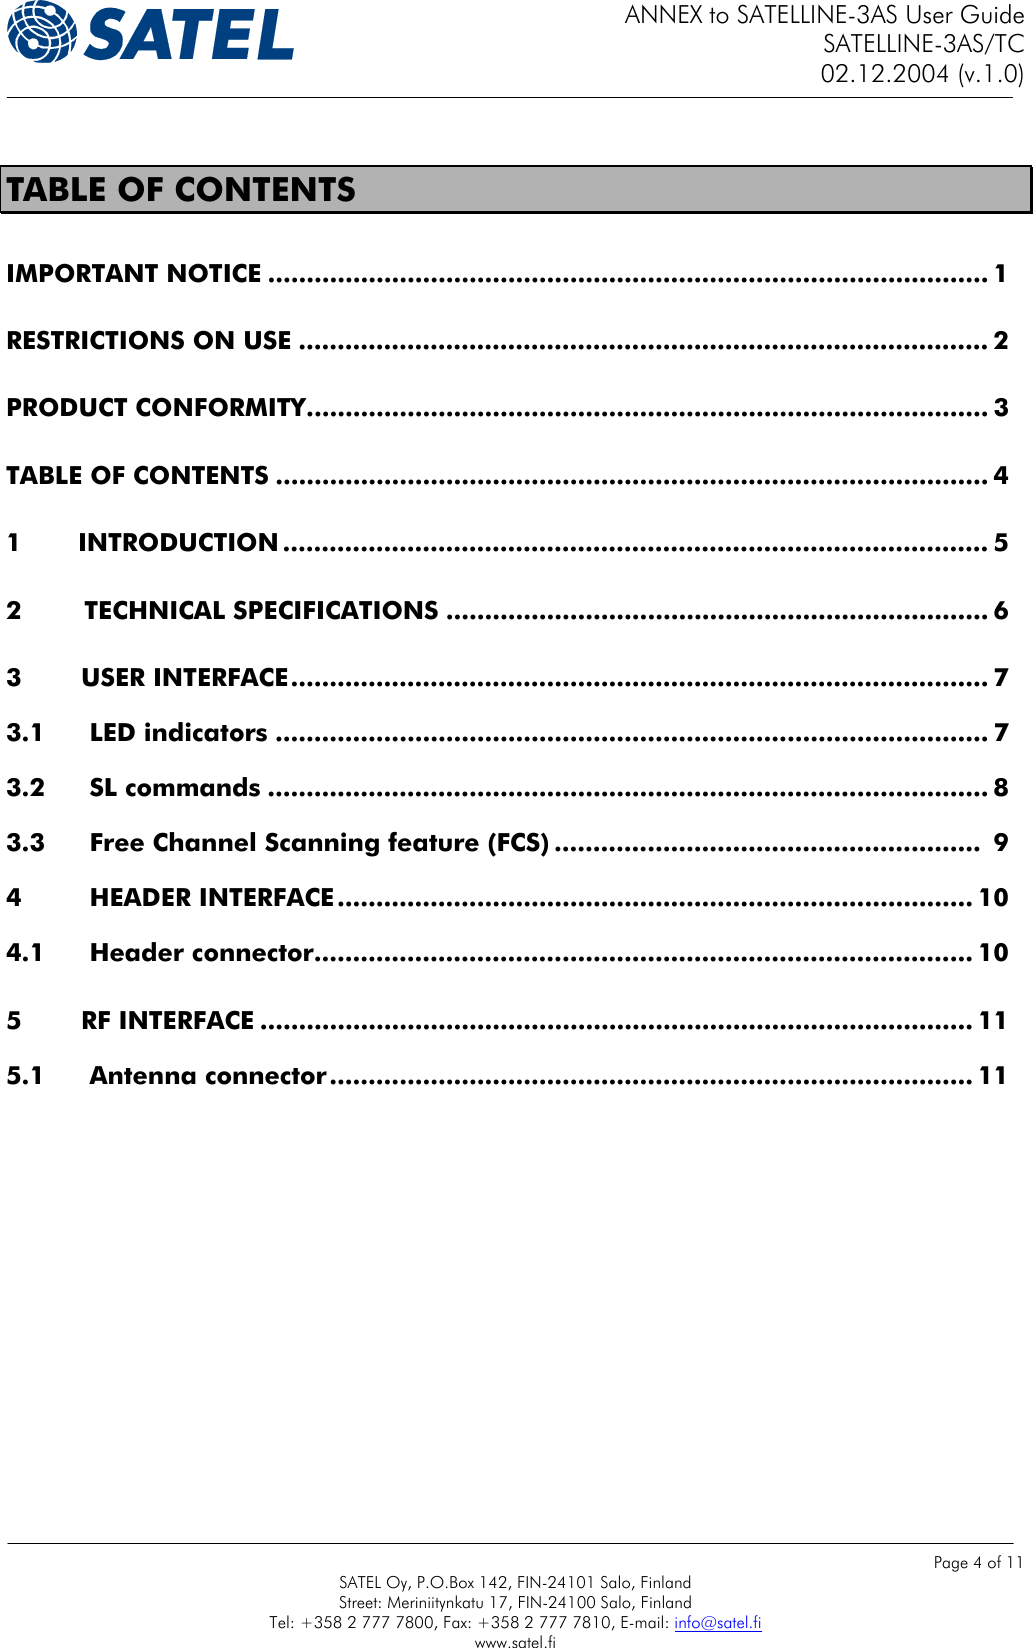 ANNEX to SATELLINE-3AS User Guide SATELLINE-3AS/TC 02.12.2004 (v.1.0)    Page 4 of 11 SATEL Oy, P.O.Box 142, FIN-24101 Salo, Finland Street: Meriniitynkatu 17, FIN-24100 Salo, Finland Tel: +358 2 777 7800, Fax: +358 2 777 7810, E-mail: info@satel.fi www.satel.fi  TABLE OF CONTENTS IMPORTANT NOTICE ............................................................................................. 1 RESTRICTIONS ON USE ......................................................................................... 2 PRODUCT CONFORMITY........................................................................................ 3 TABLE OF CONTENTS ............................................................................................ 4 1         INTRODUCTION ........................................................................................... 5 2        TECHNICAL SPECIFICATIONS ...................................................................... 6 3 USER INTERFACE.......................................................................................... 7 3.1 LED indicators ............................................................................................ 7 3.2 SL commands ............................................................................................. 8 3.3 Free Channel Scanning feature (FCS) .......................................................  9 4 HEADER INTERFACE.................................................................................. 10 4.1 Header connector..................................................................................... 10 5 RF INTERFACE ............................................................................................ 11 5.1 Antenna connector................................................................................... 11   